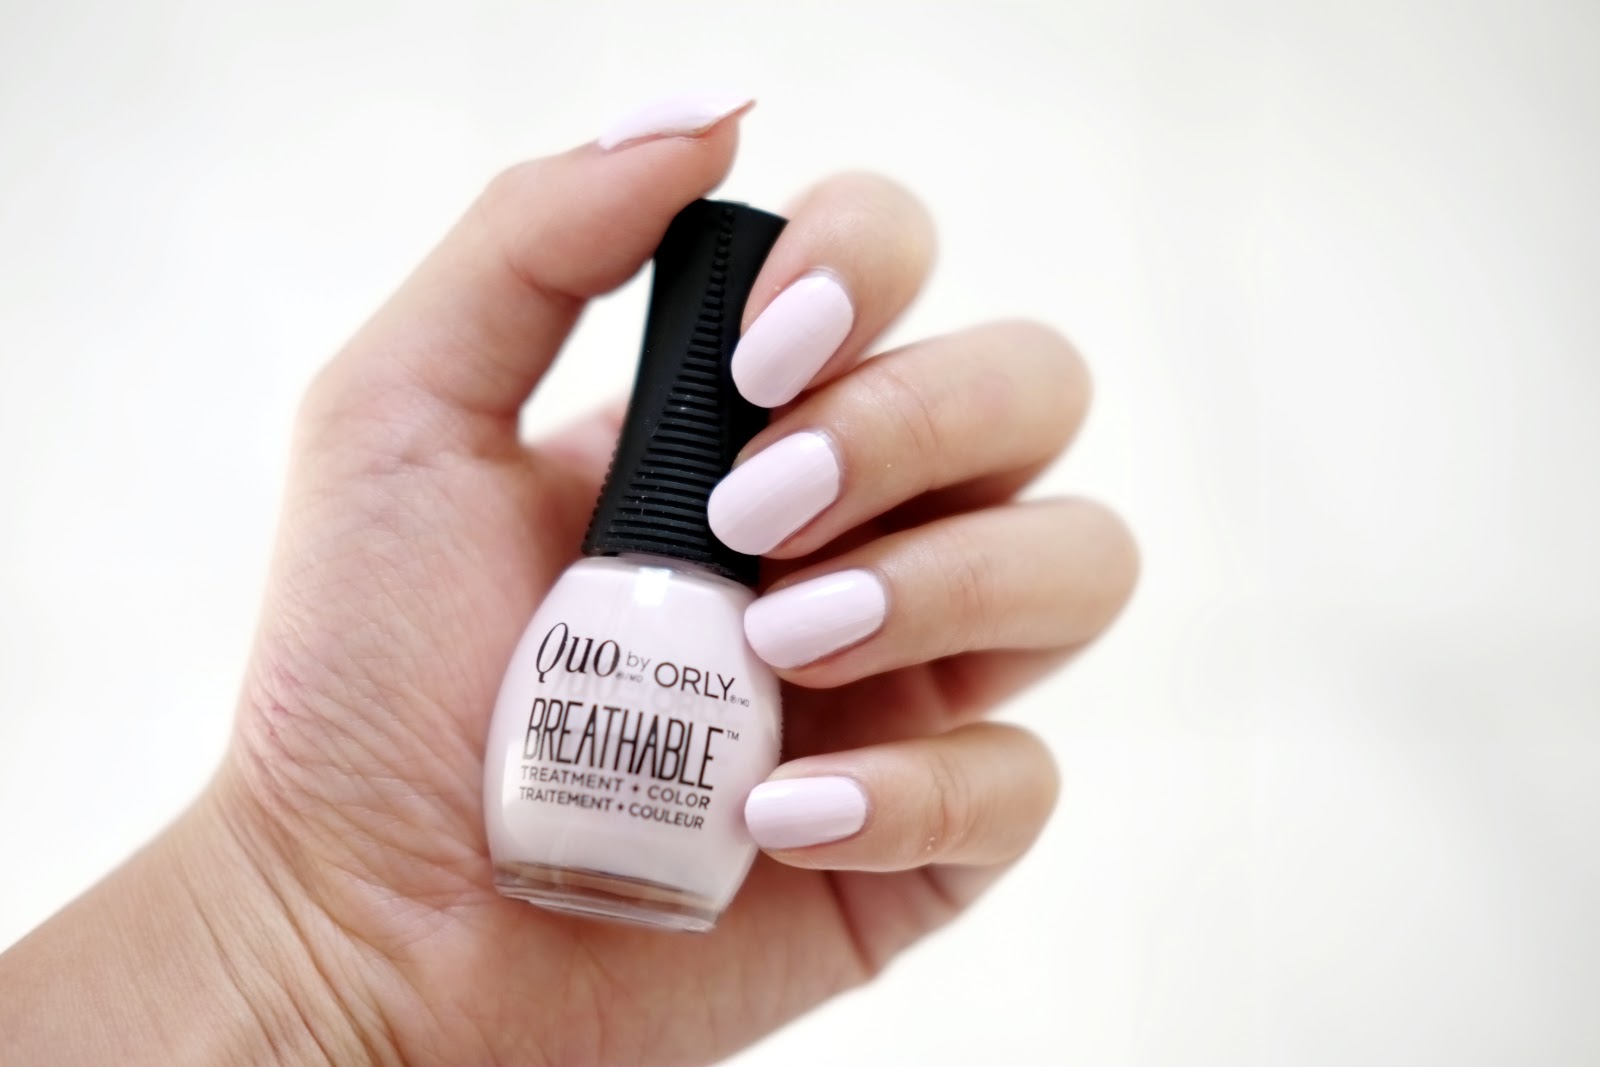 9. Orly Breathable Treatment + Color Nail Polish - wide 5